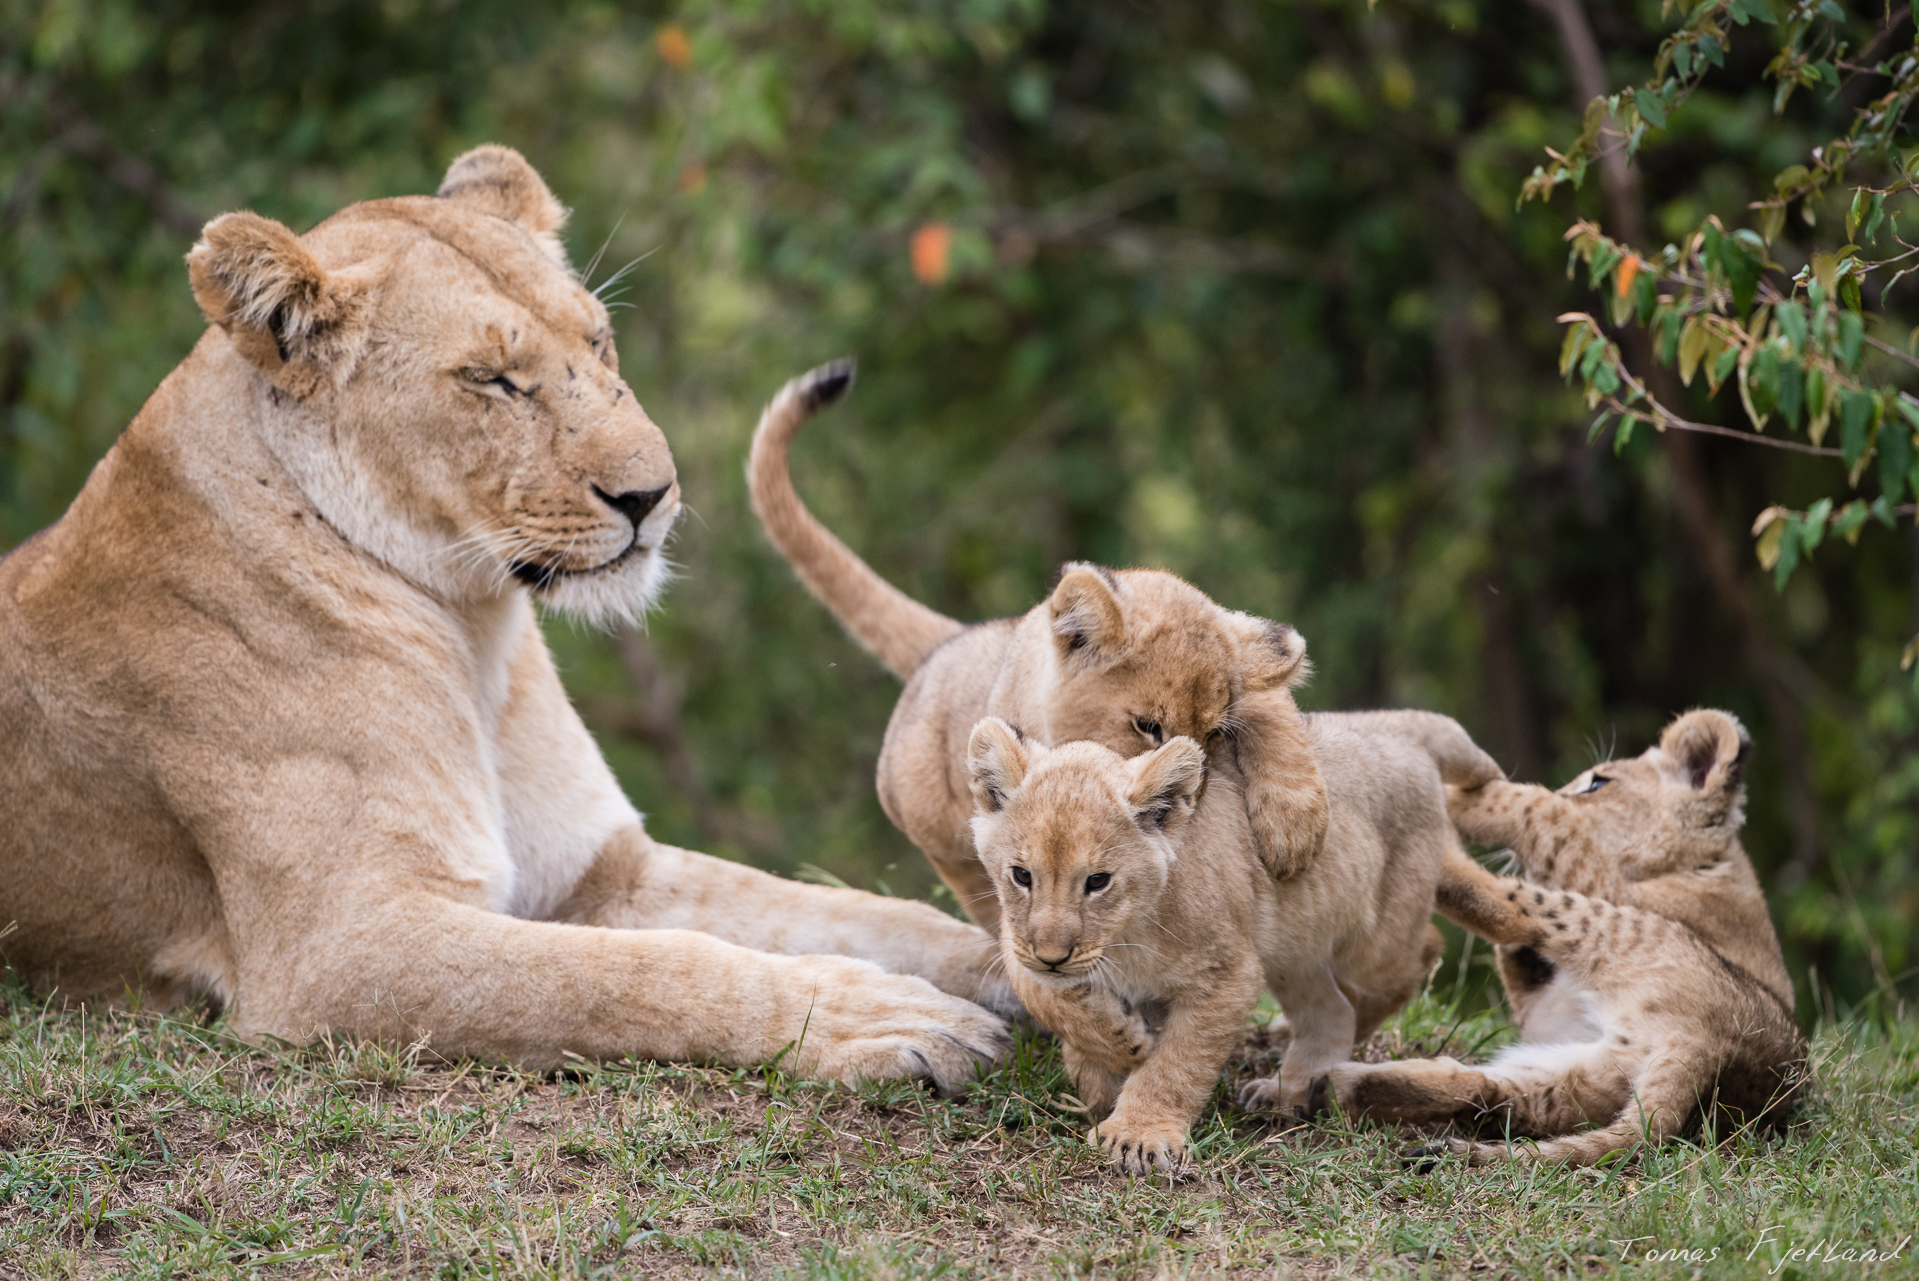 The breaks don't last long for the hyperactive lion cubs. Soon they're back at trying to pretend kill eachother.